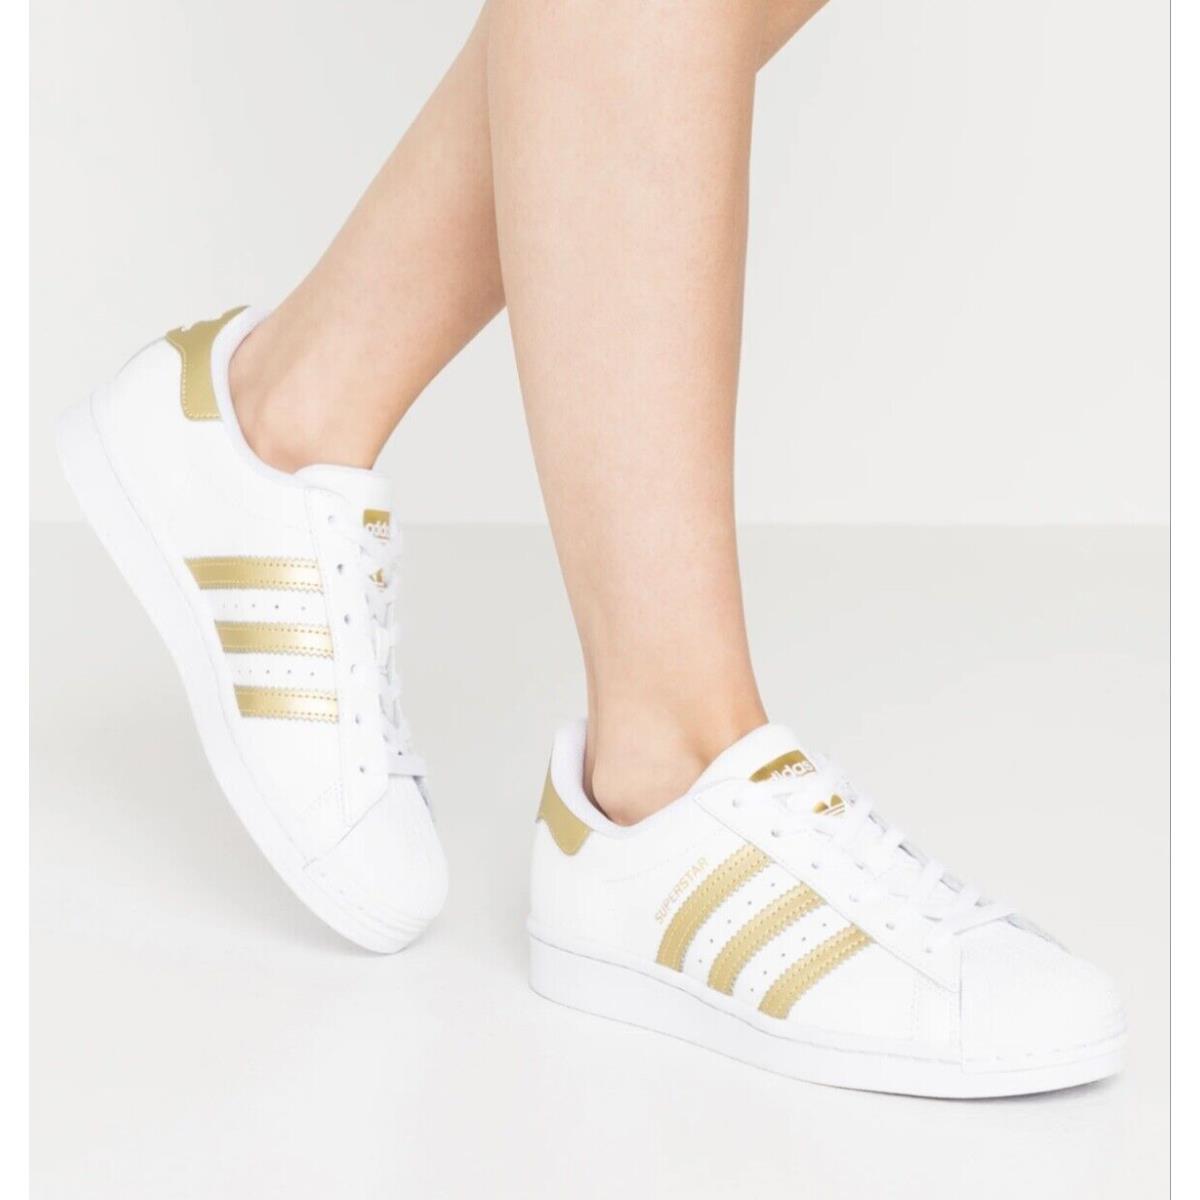 Adidas Superstar Womens Casual Retro Shoe White Gold Athletic Trainer Sneaker